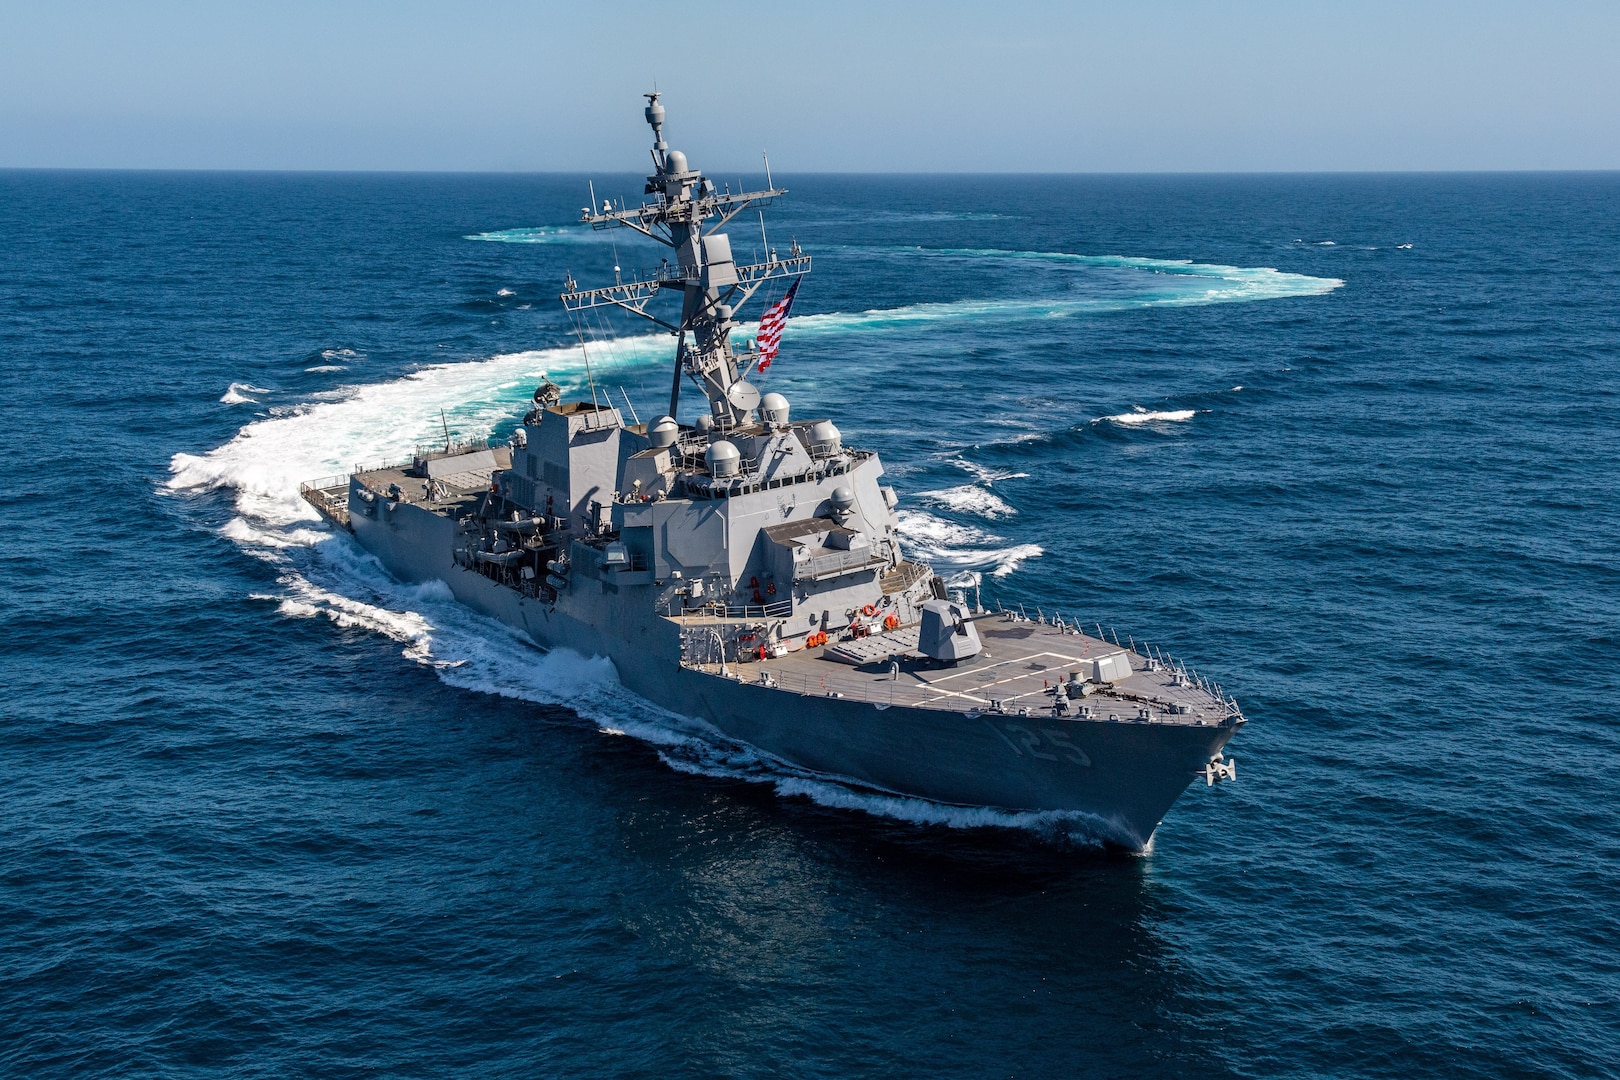 The future USS Jack H. Lucas (DDG 125) completed acceptance trials, May 18. DDG 125 is the first Arleigh Burke-class guided-missile destroyer built in the Flight III configuration.